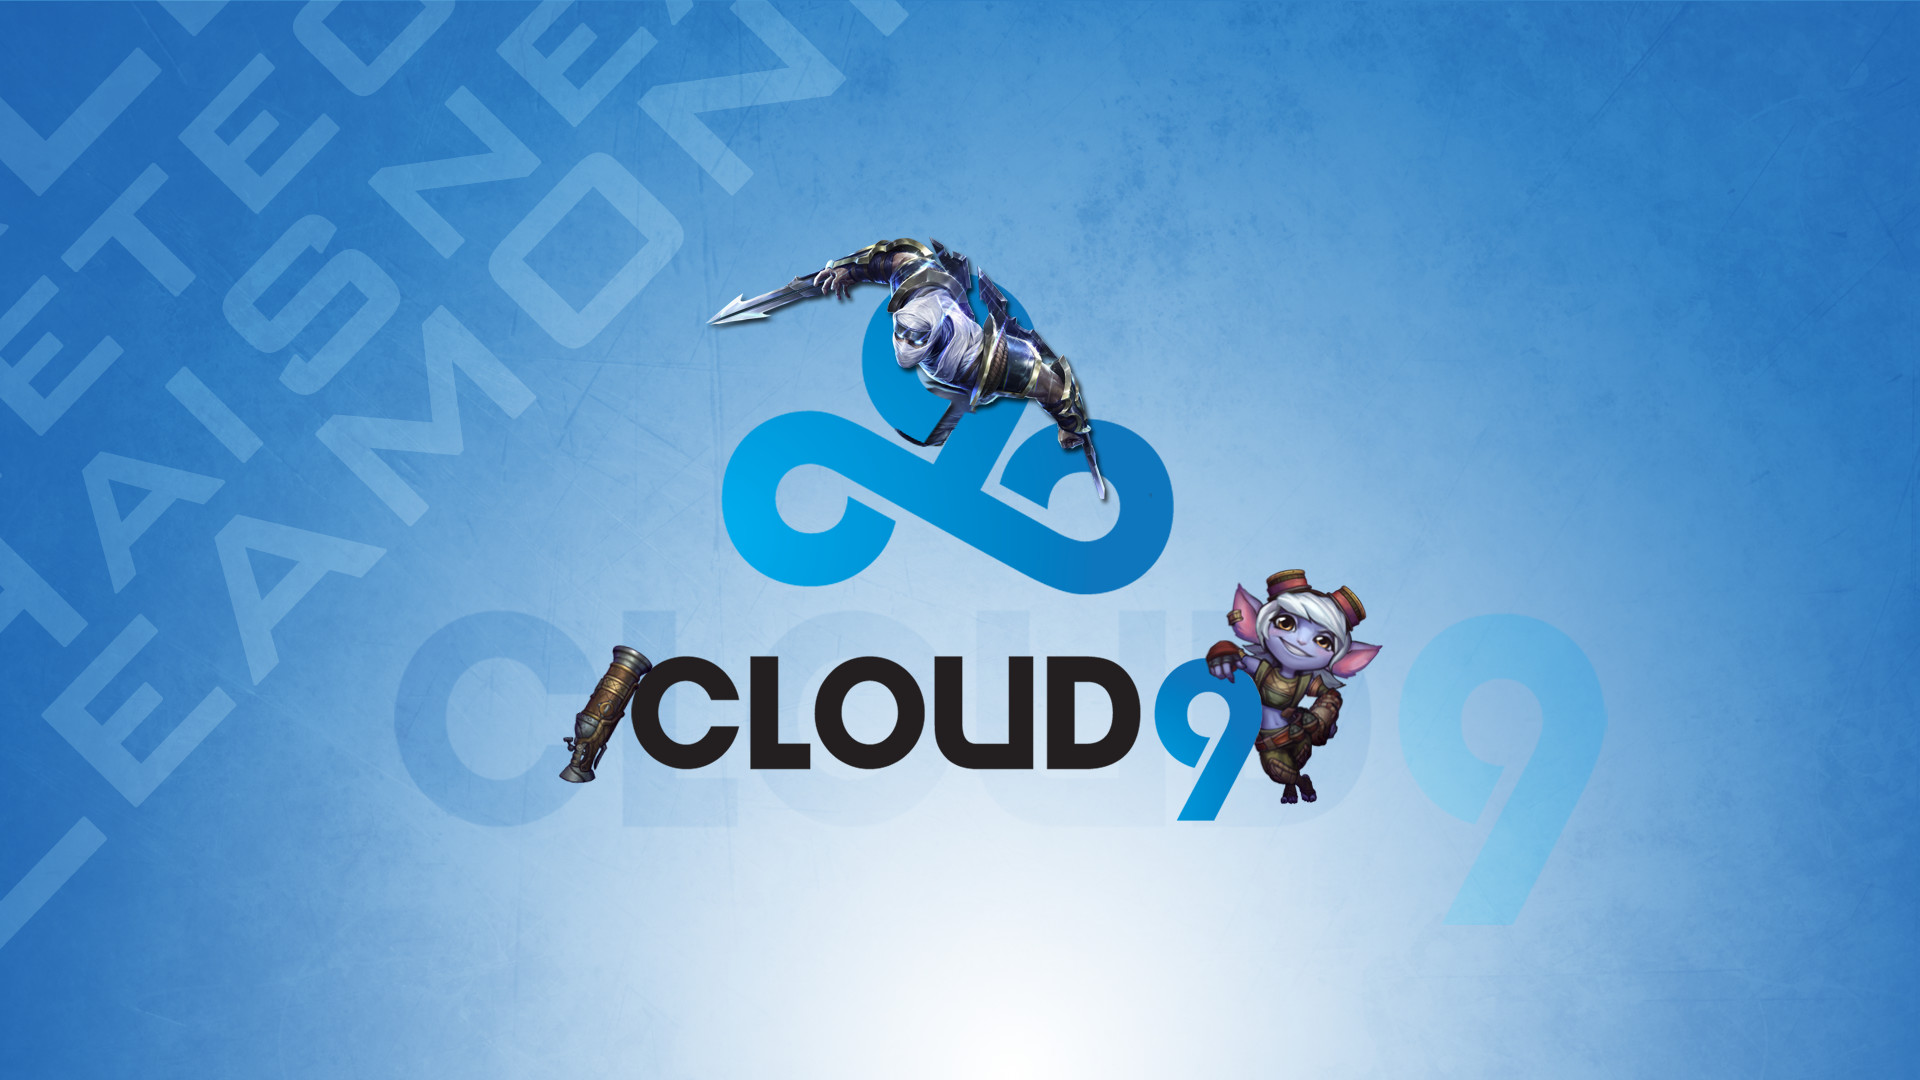 1920x1080 Cloud 9 Wallpaper by TheRempton Cloud 9 Wallpaper by TheRempton